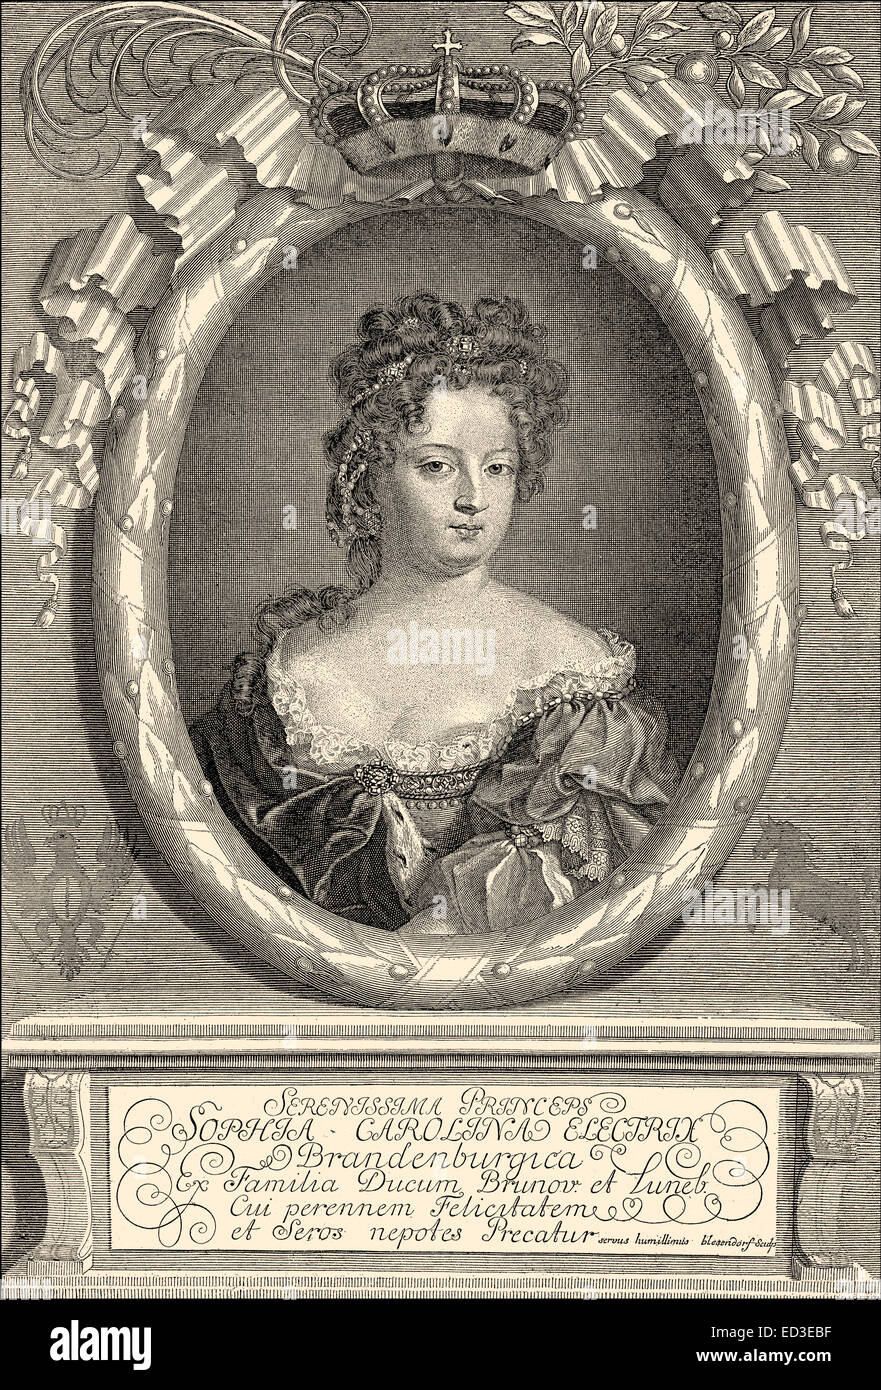 Sophia Charlotte of Hanover, 1668 - 1705, the first Queen consort in Prussia as wife of King Frederick I, Sophie Charlotte Herzo Stock Photo